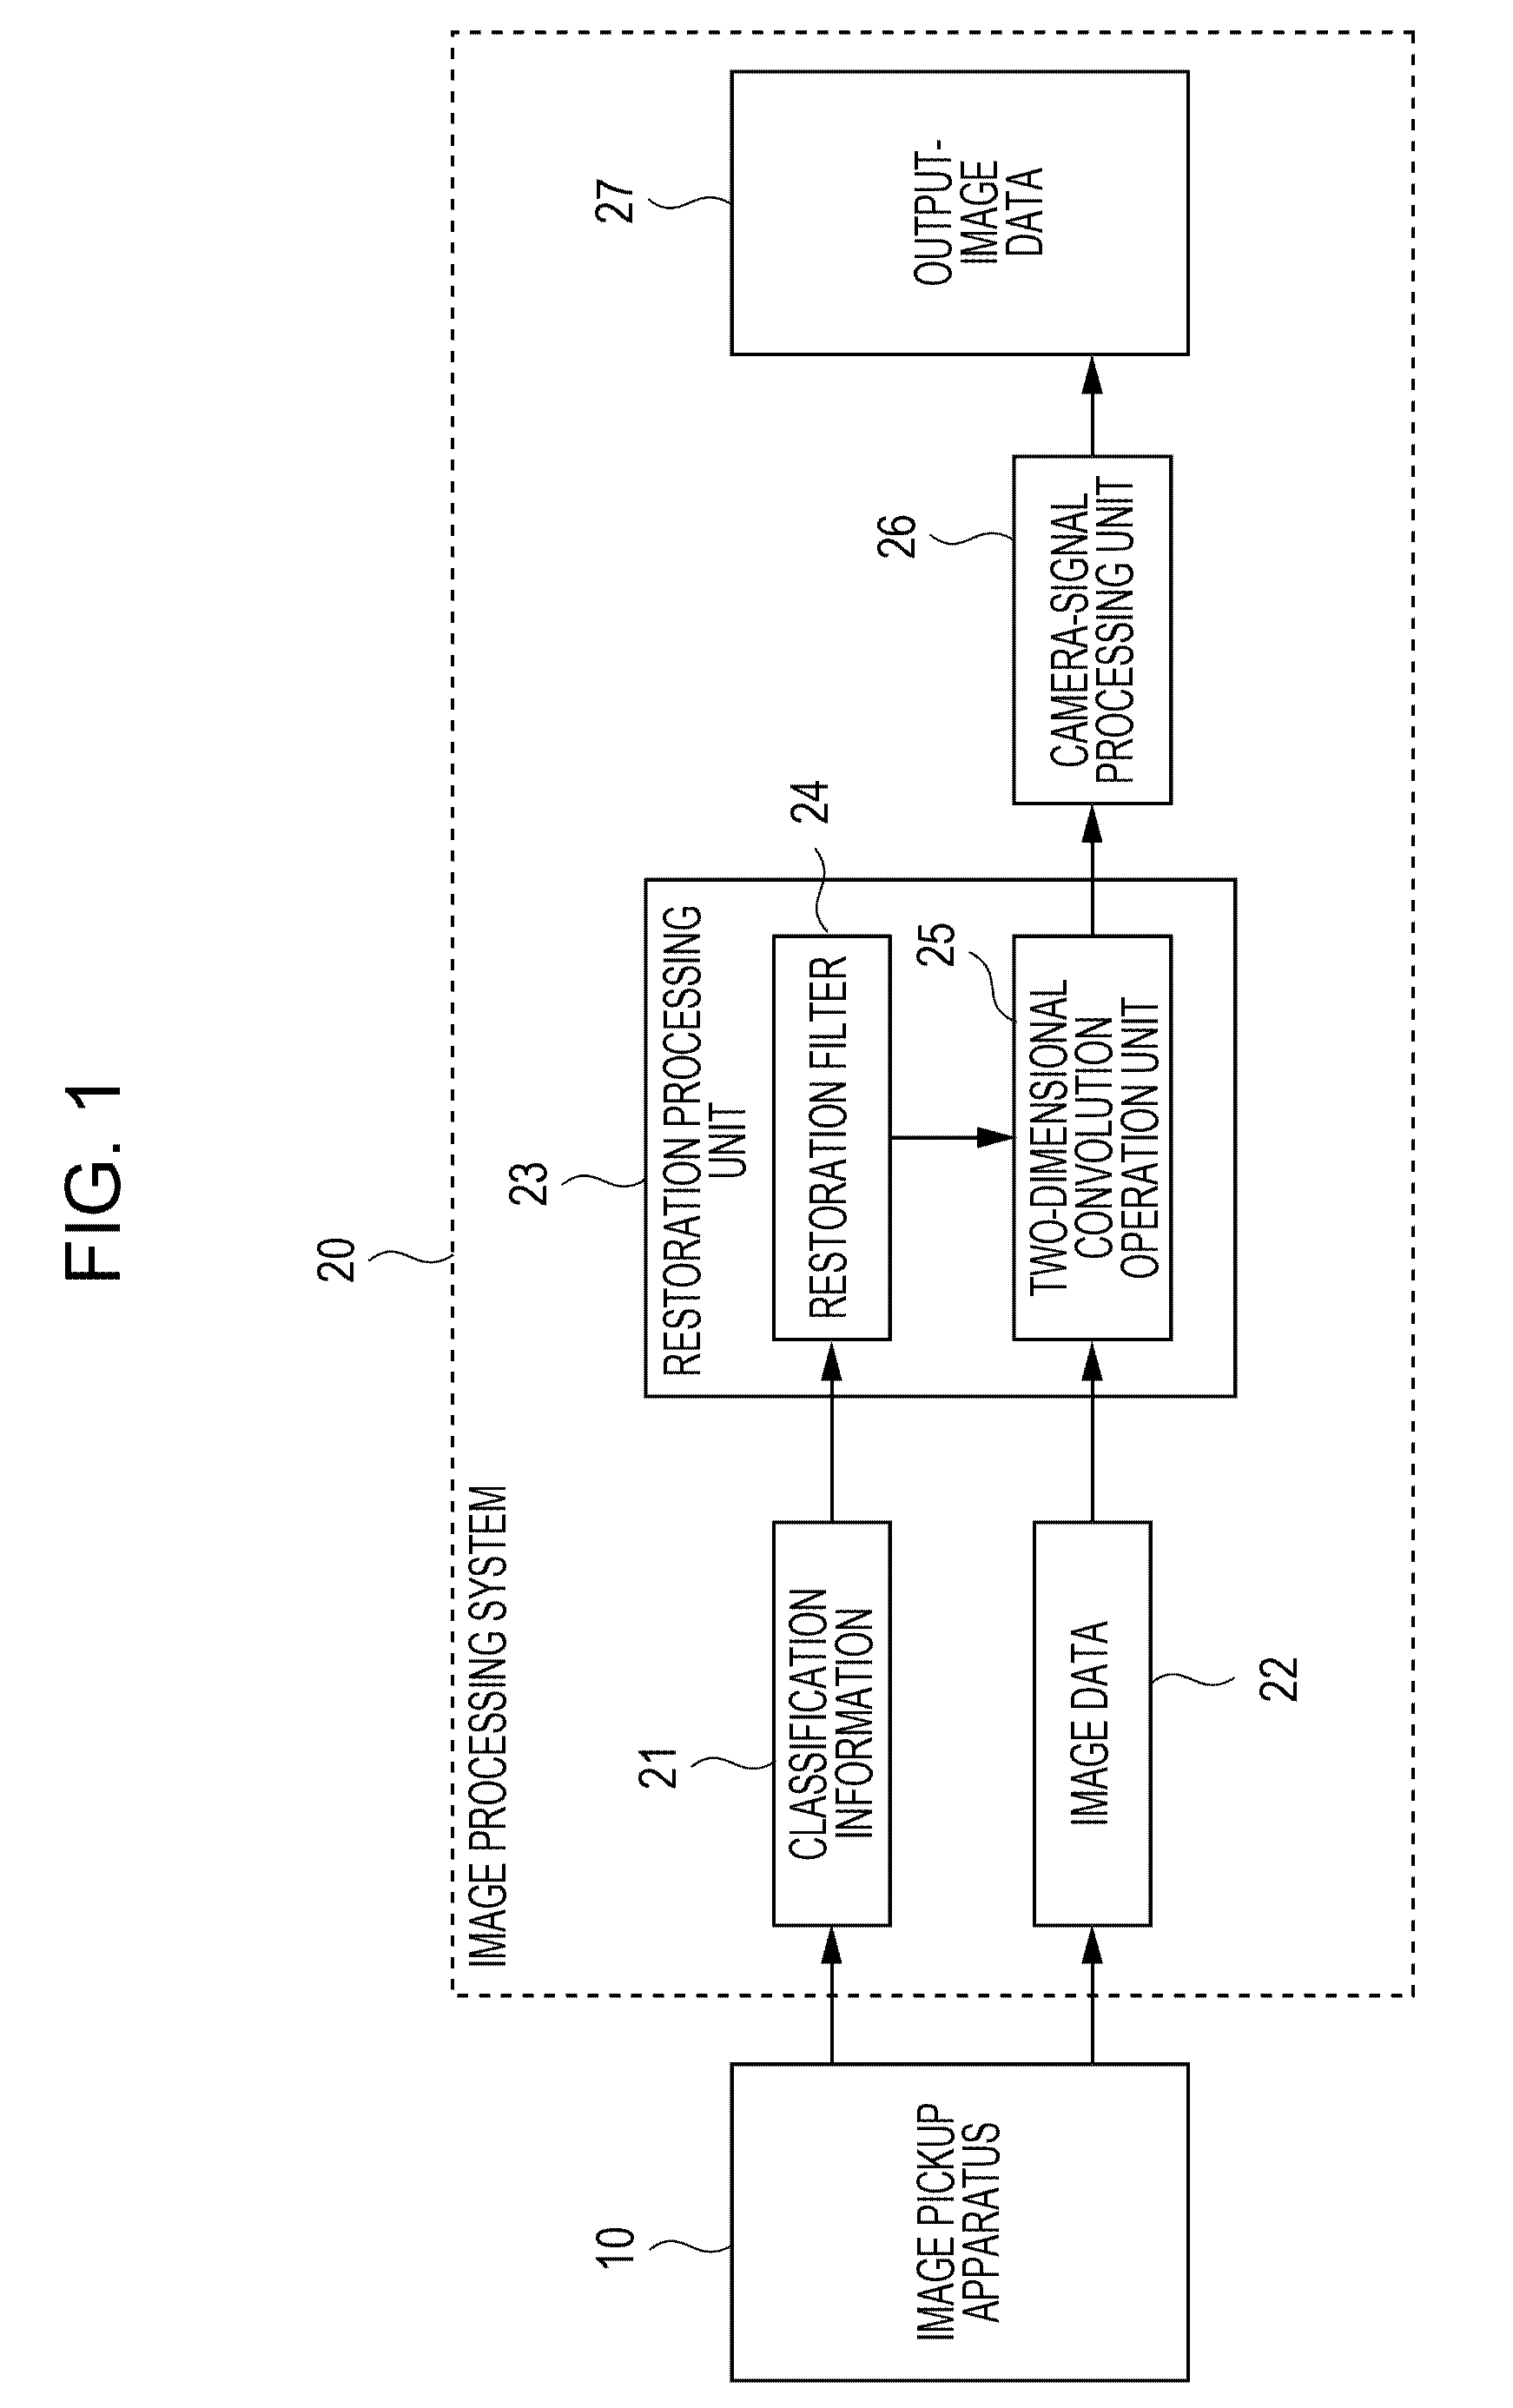 Image processing apapratus, image processing method, and program, and image processing system